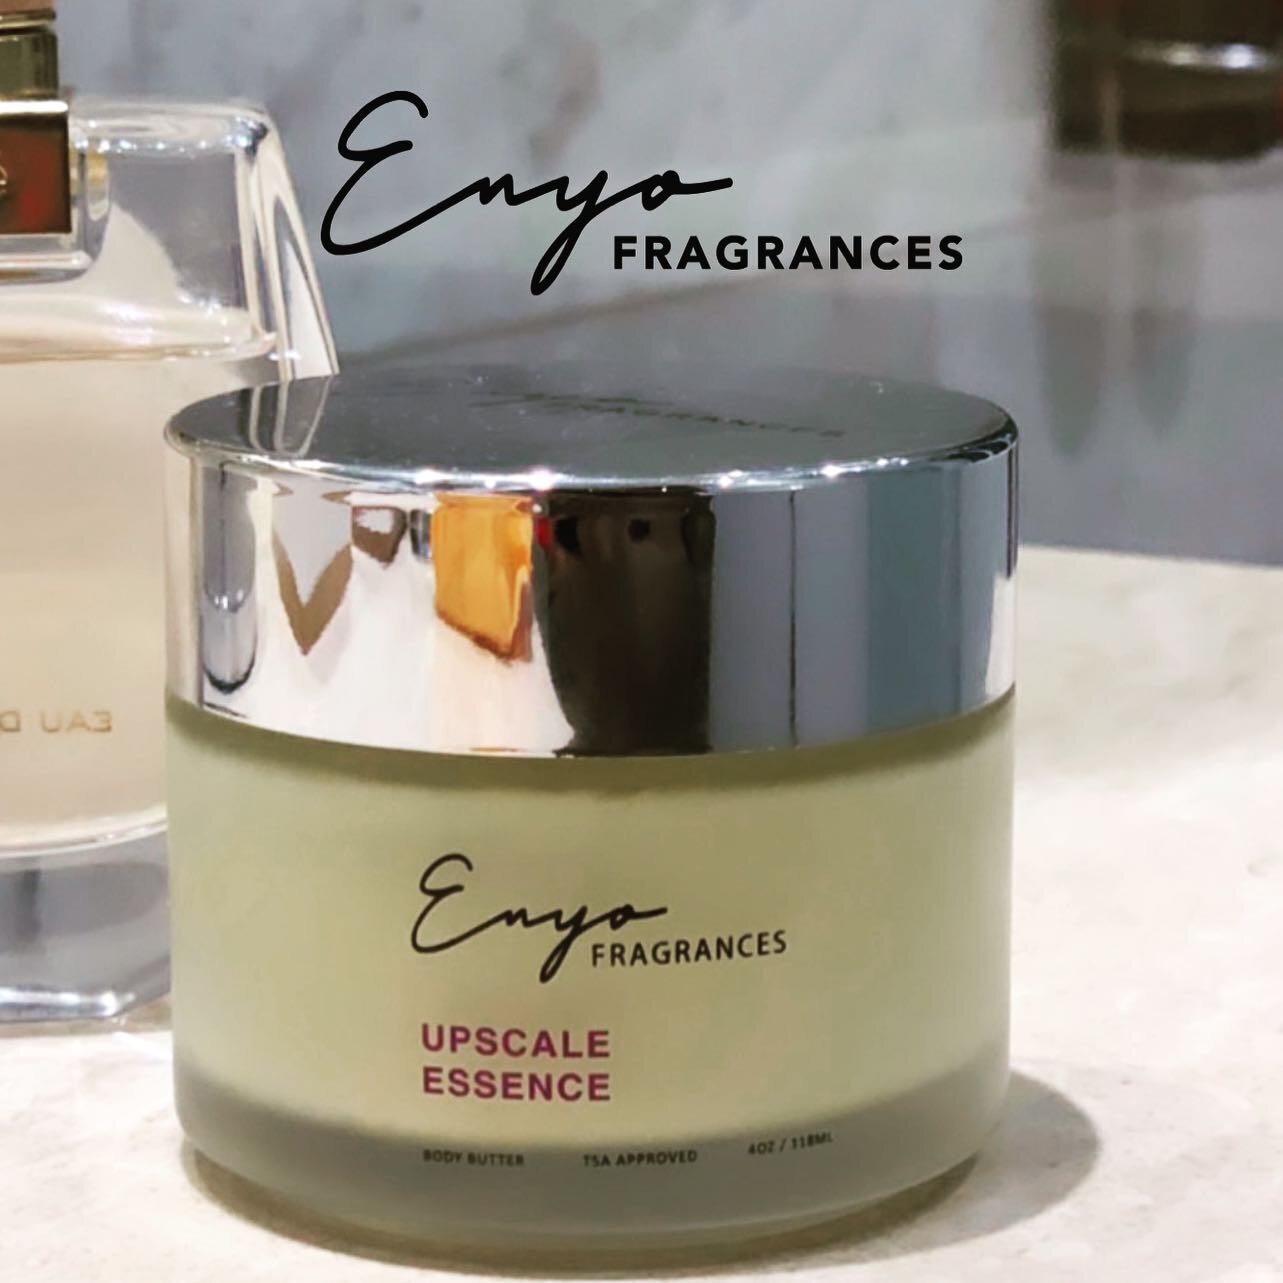 formulated with shea butter and two of perfumery's stellar ingredients, Oud wood &amp; vanilla, Upscale Essence will leave your skin smooth and with an enticing scent. 

#enyofragrances #skincare #fragrance #parfum #sheabutter #sheamoisture #cosmetic